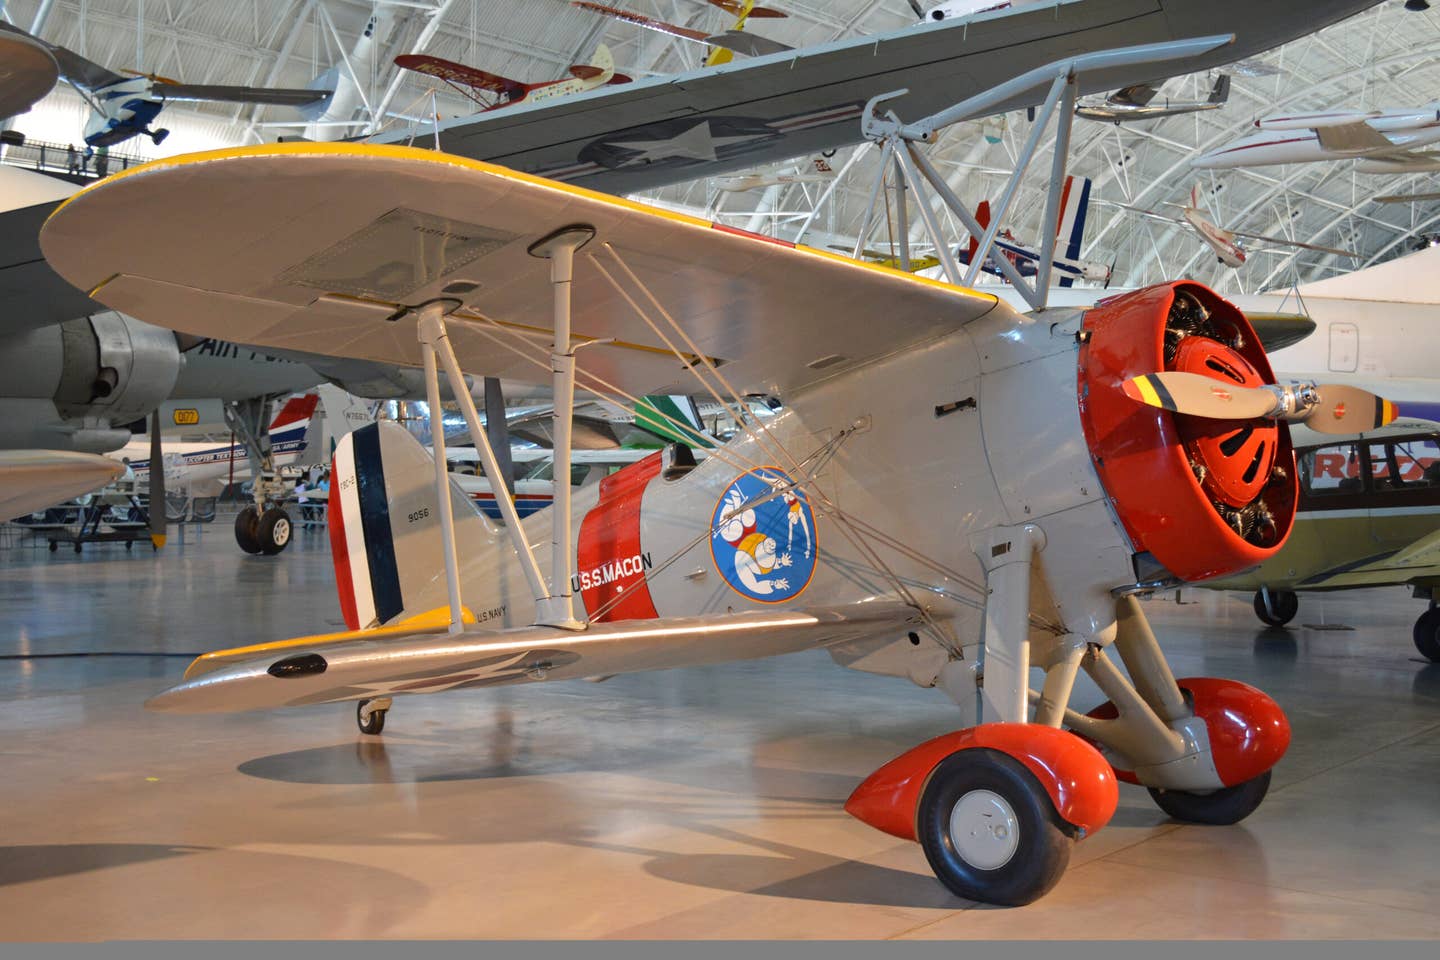 The sole surviving F9C-2 Sparrowhawk, actually the second prototype, XF9C-2. The aircraft is depicted as an F9C-2 that flew from the USS <em>Macon</em> and is on display at the Steven F. Udvar Hazy Center as part of the National Air and Space Museum. <em>Alan Wilson/Wikimedia Commons</em><br>